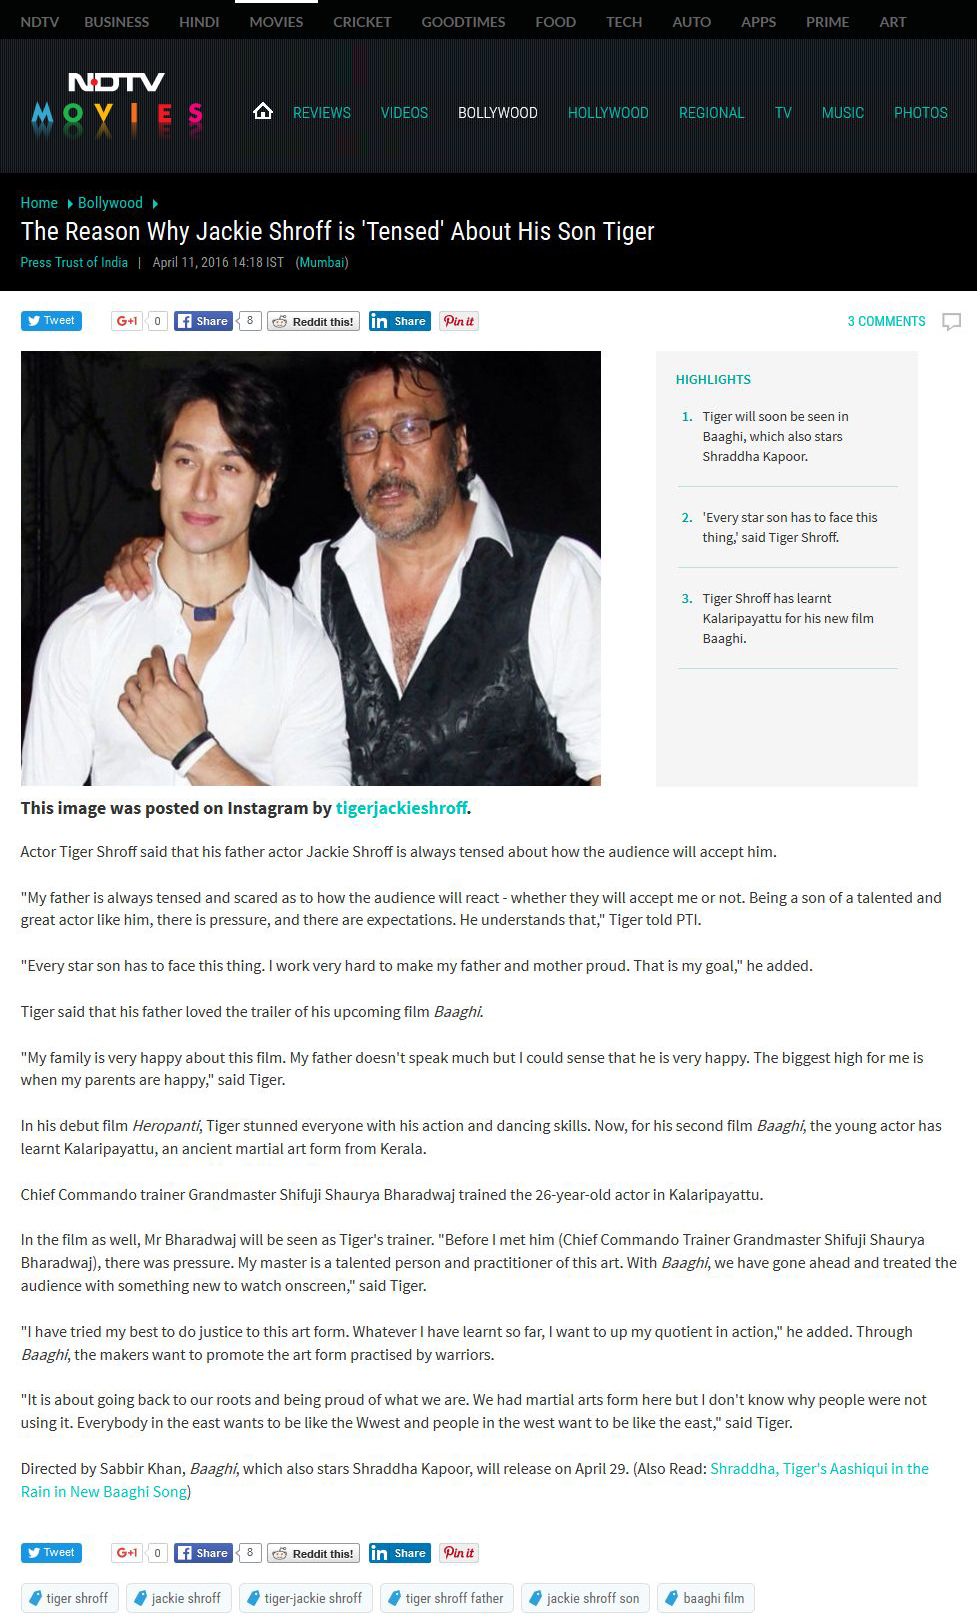 The Reason Why Jackie Shroff is Tensed About His Son Tiger